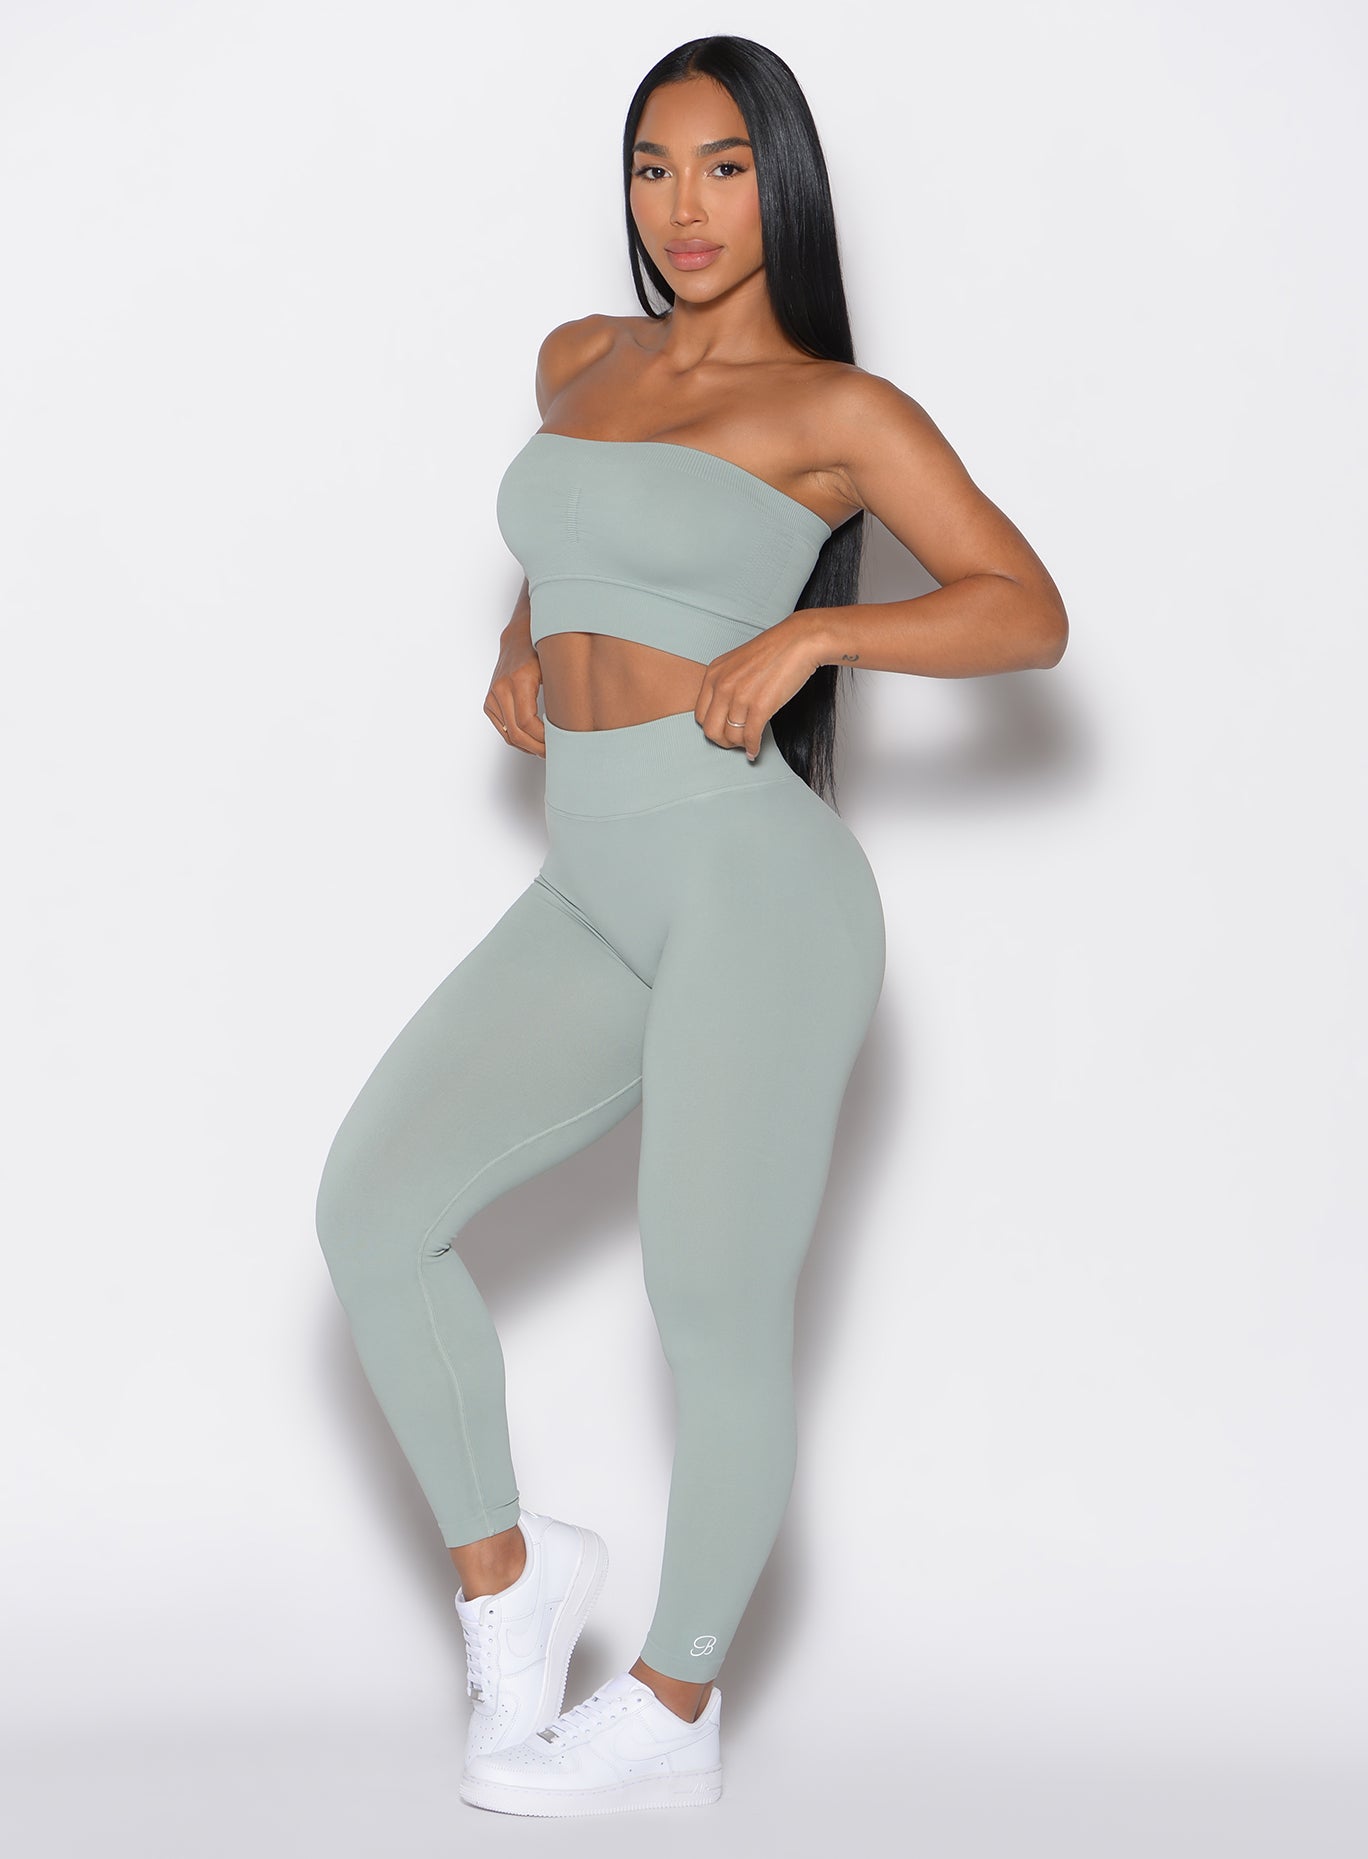 front profile view of a model adjusting her waistband of the  cheeky seamless leggings that she is wearing in light jade color along with the matching top